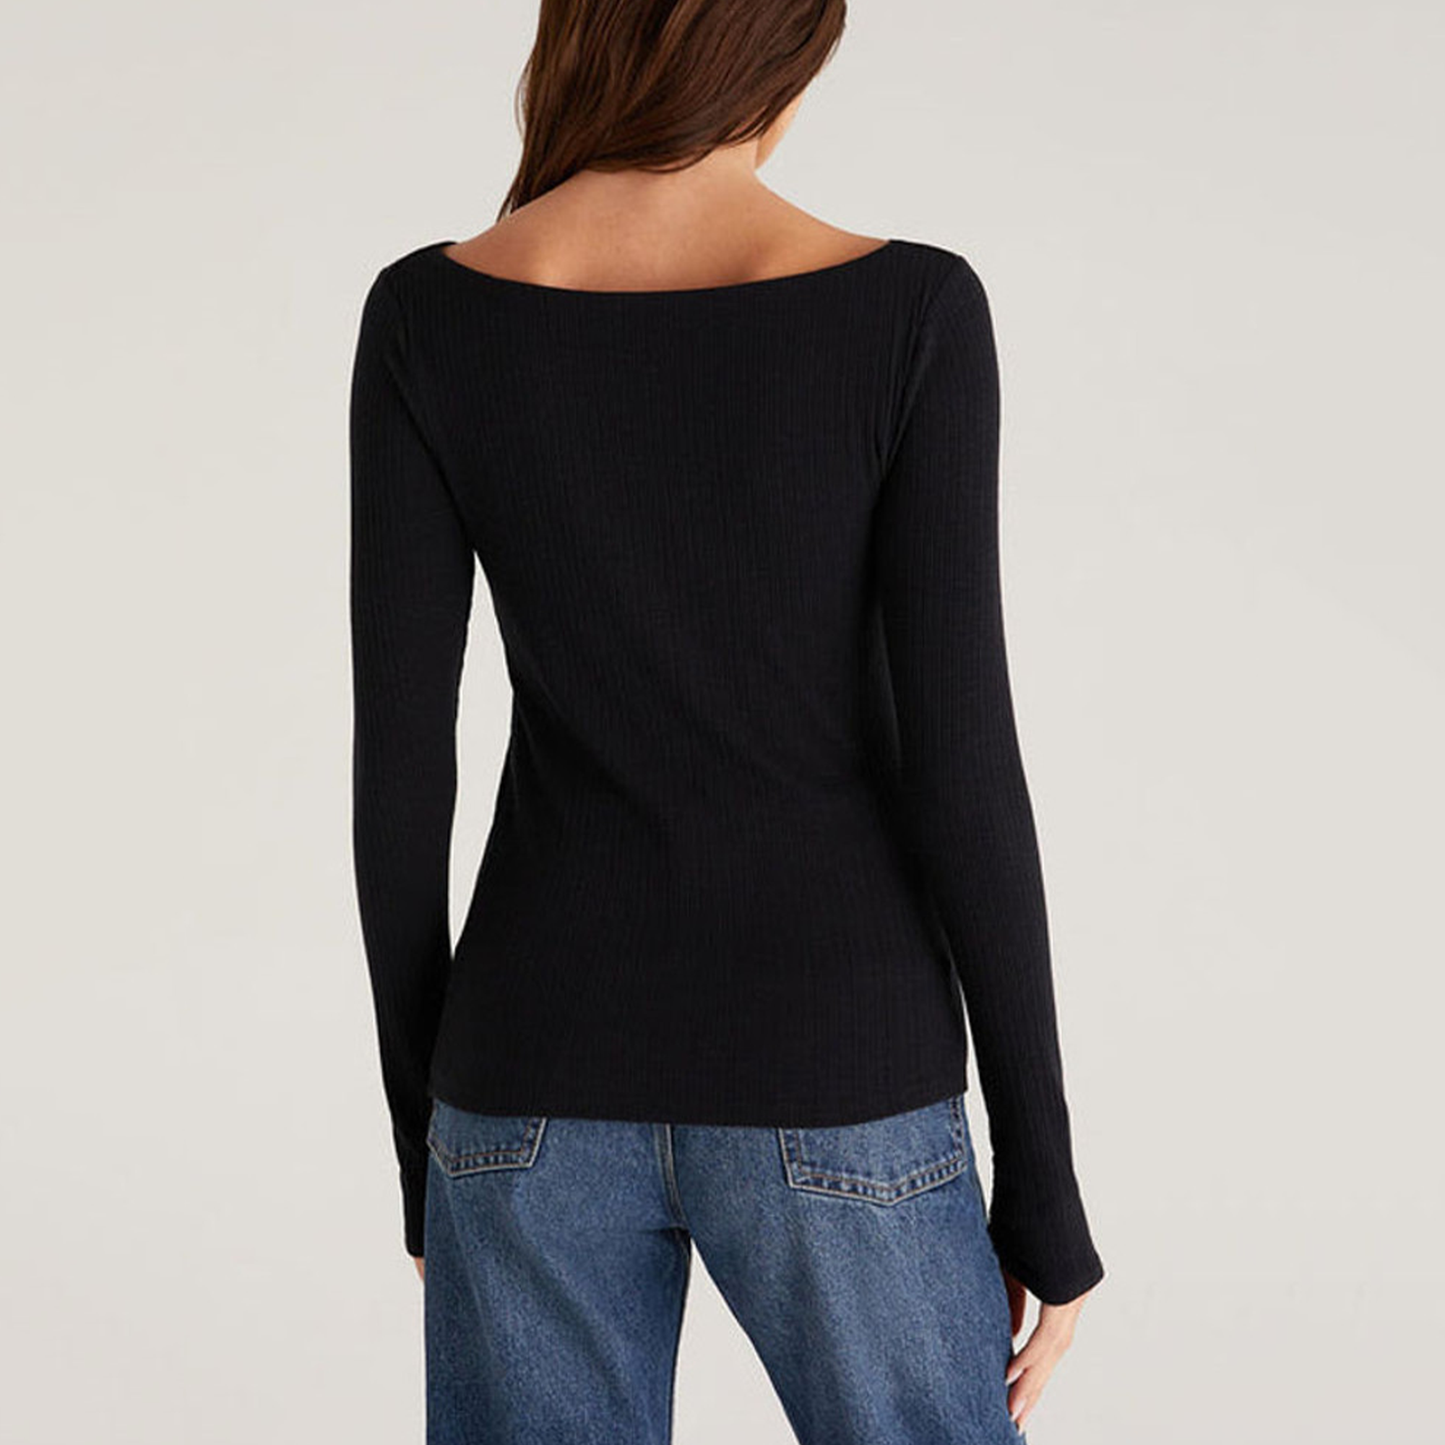 Z Supply Clara Rib Top. The fabric is to die for. You'll be cozy all day long in this soft, ribbed knit. It features a longer length so it's easy to tuck into denim or your favorite midi skirt. It has a slim, flattering fit. The Clara will be one of those basics you will be styling over and over again